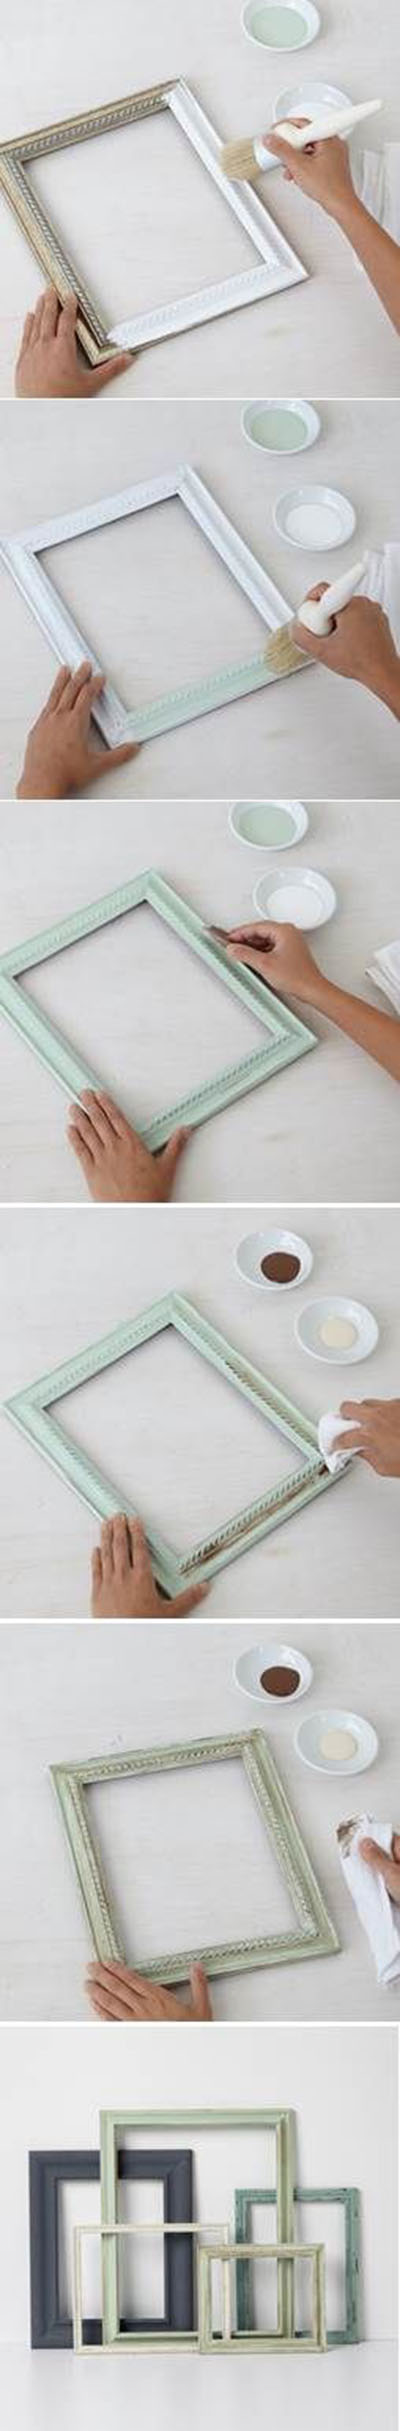 3 Make beautiful frames with Vintage Decor Paint and Wax 829acd1